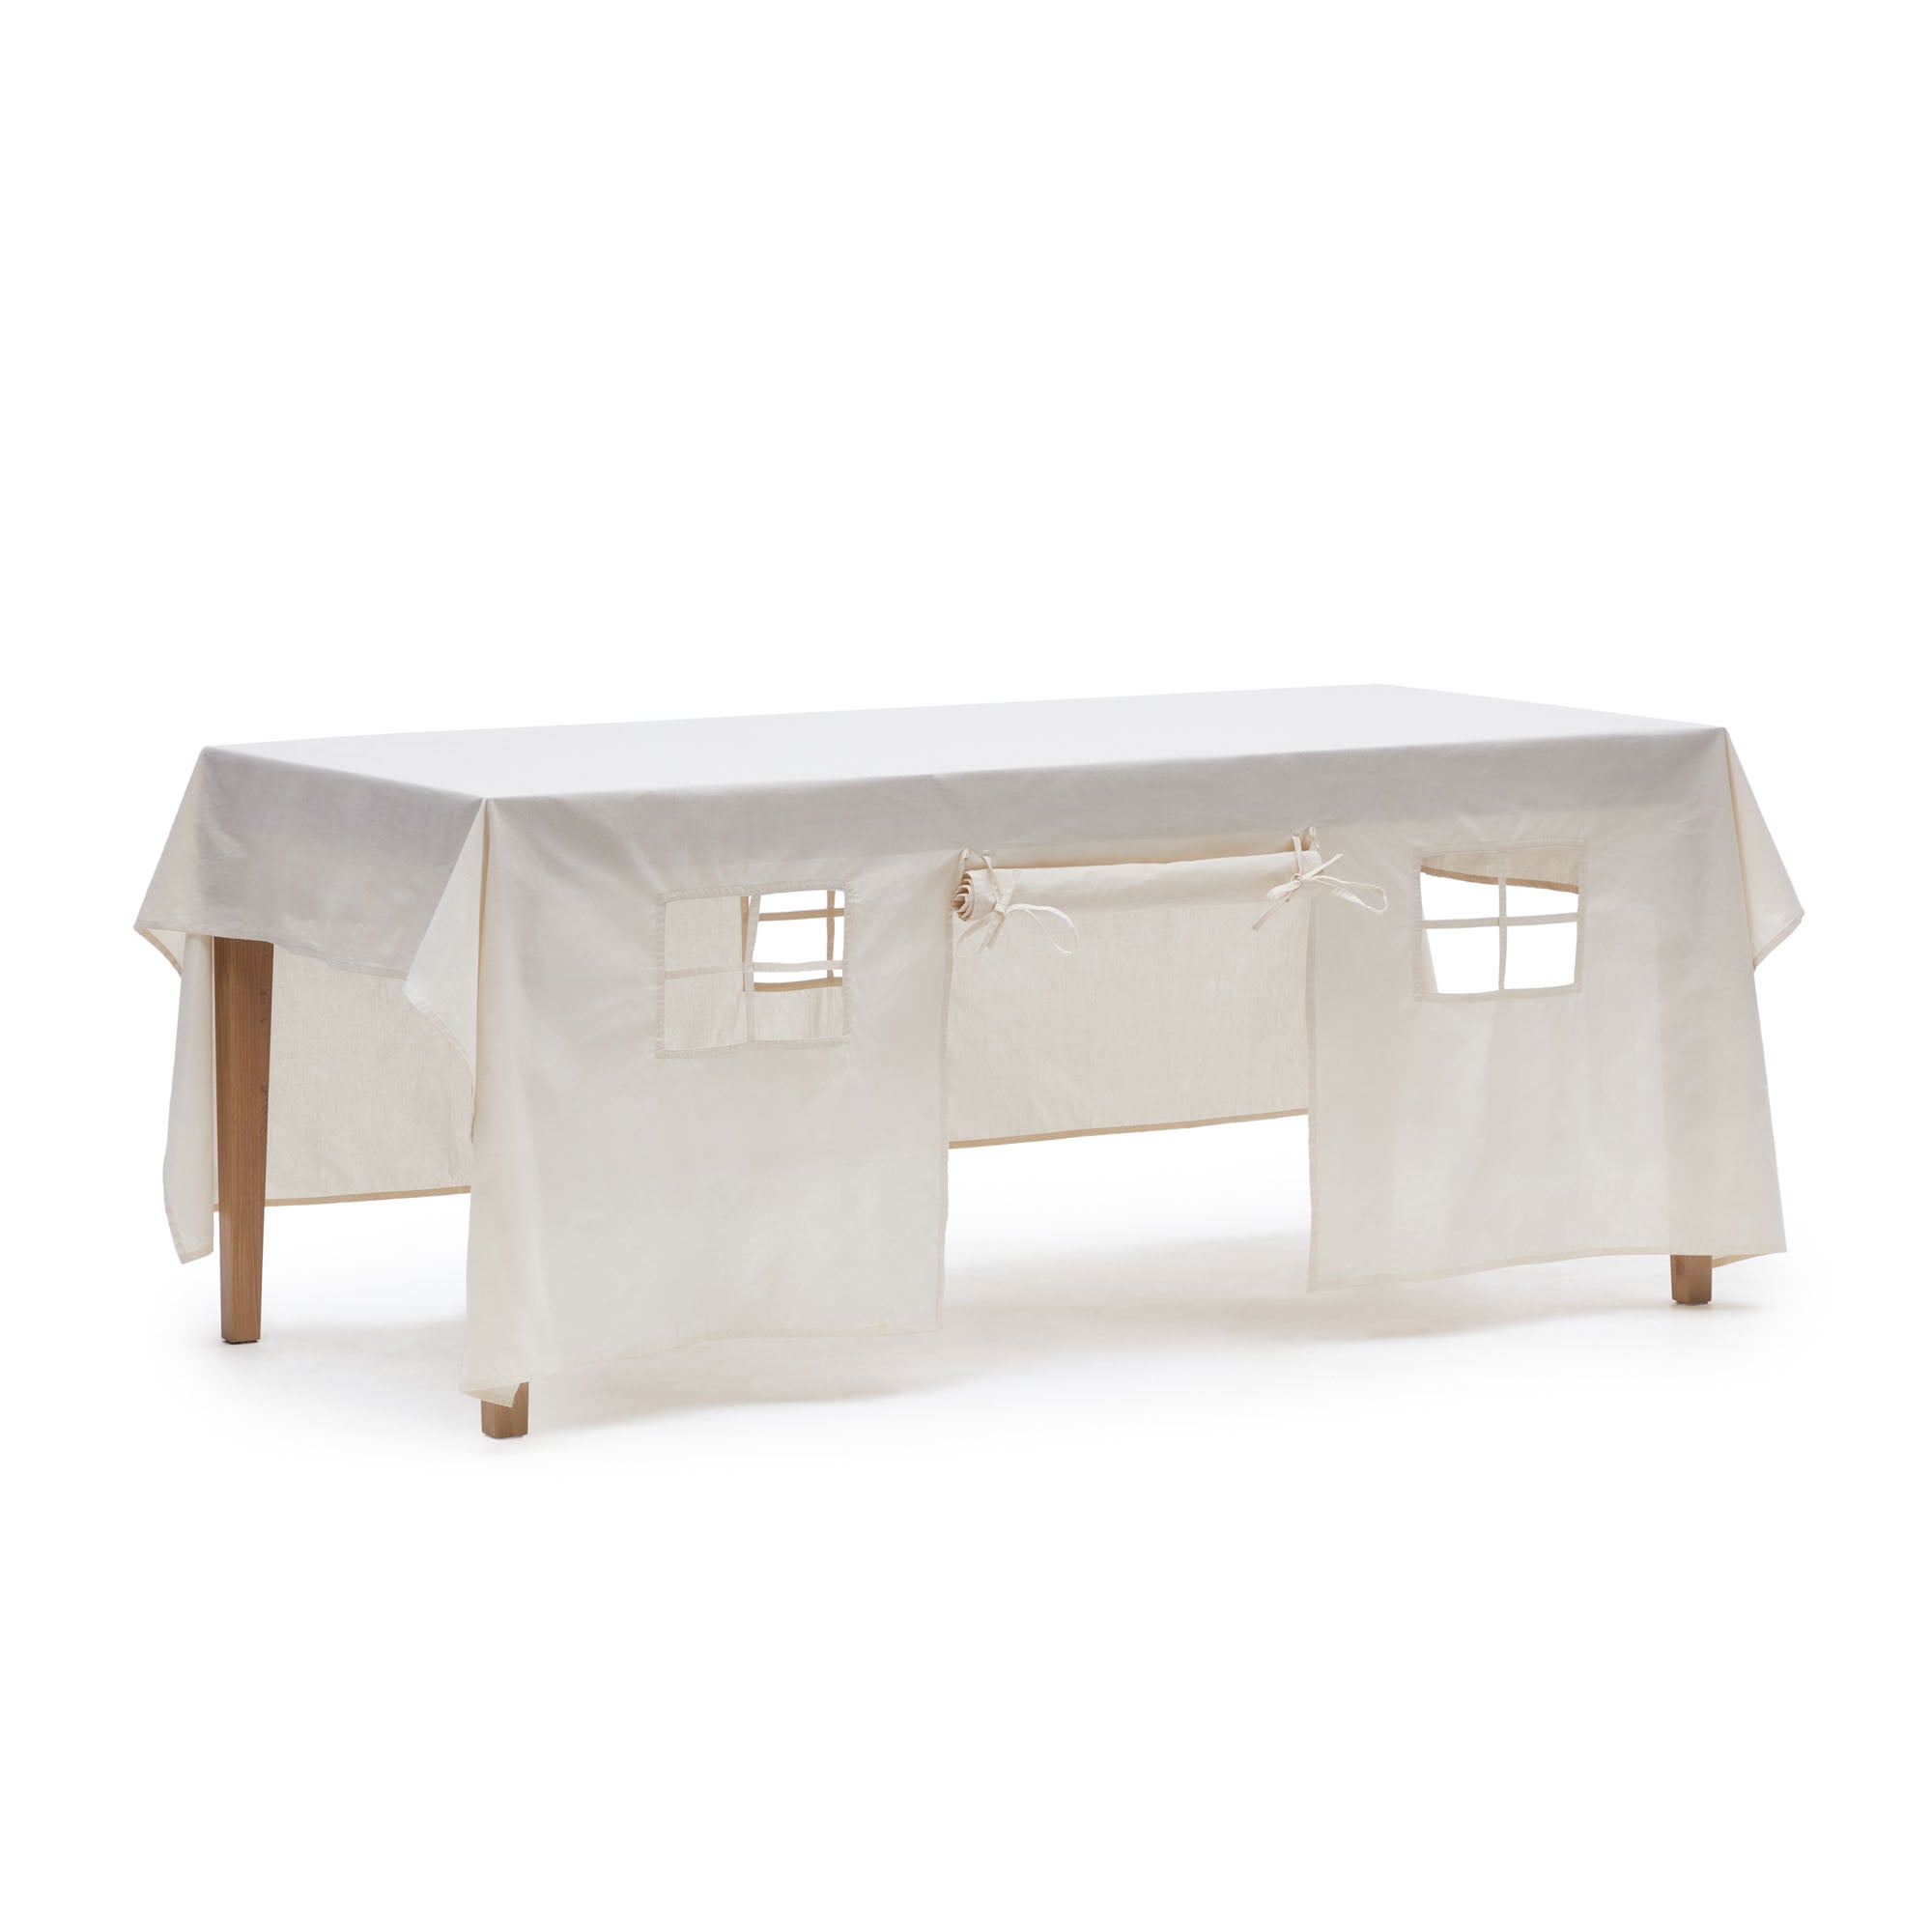 Temis 100% cotton playhouse with cover in white 230 x 210 cm